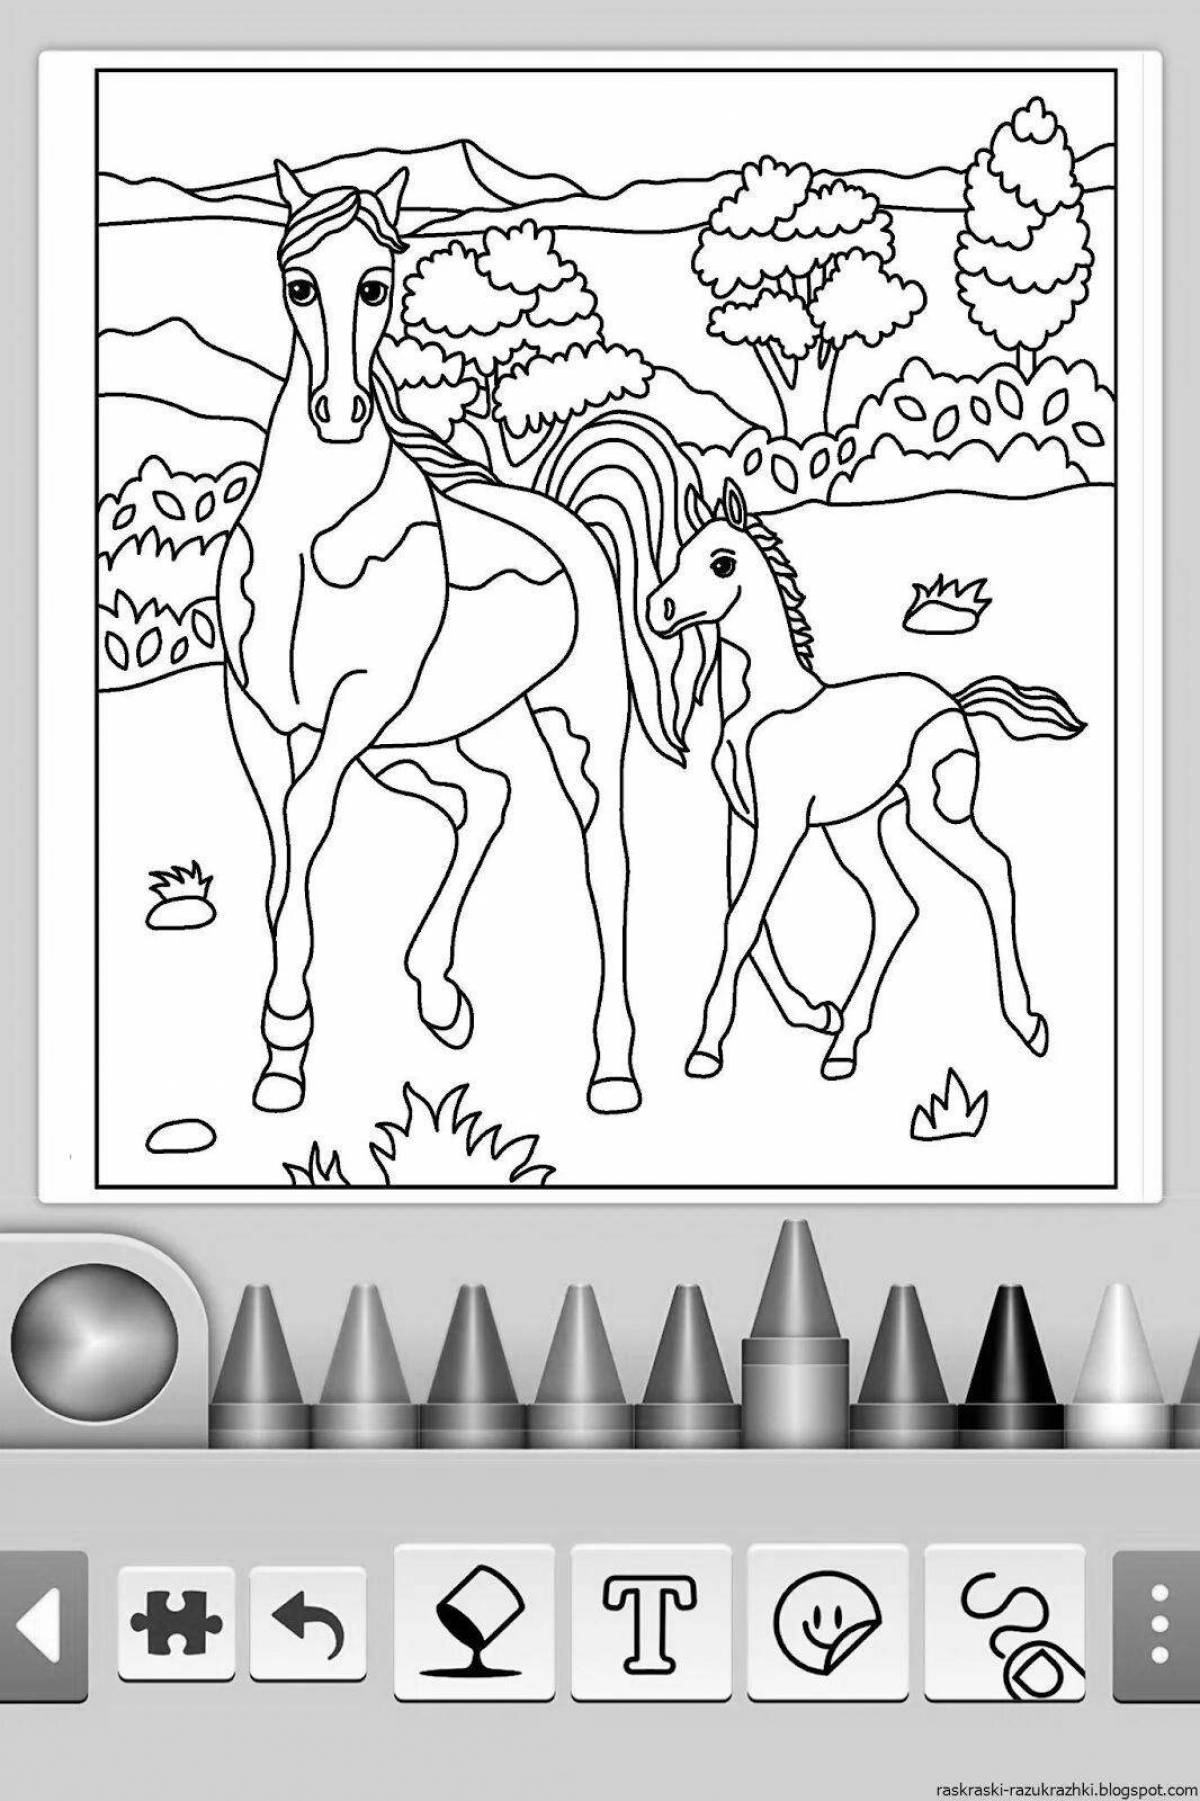 Amazing coloring game for kids 3 4